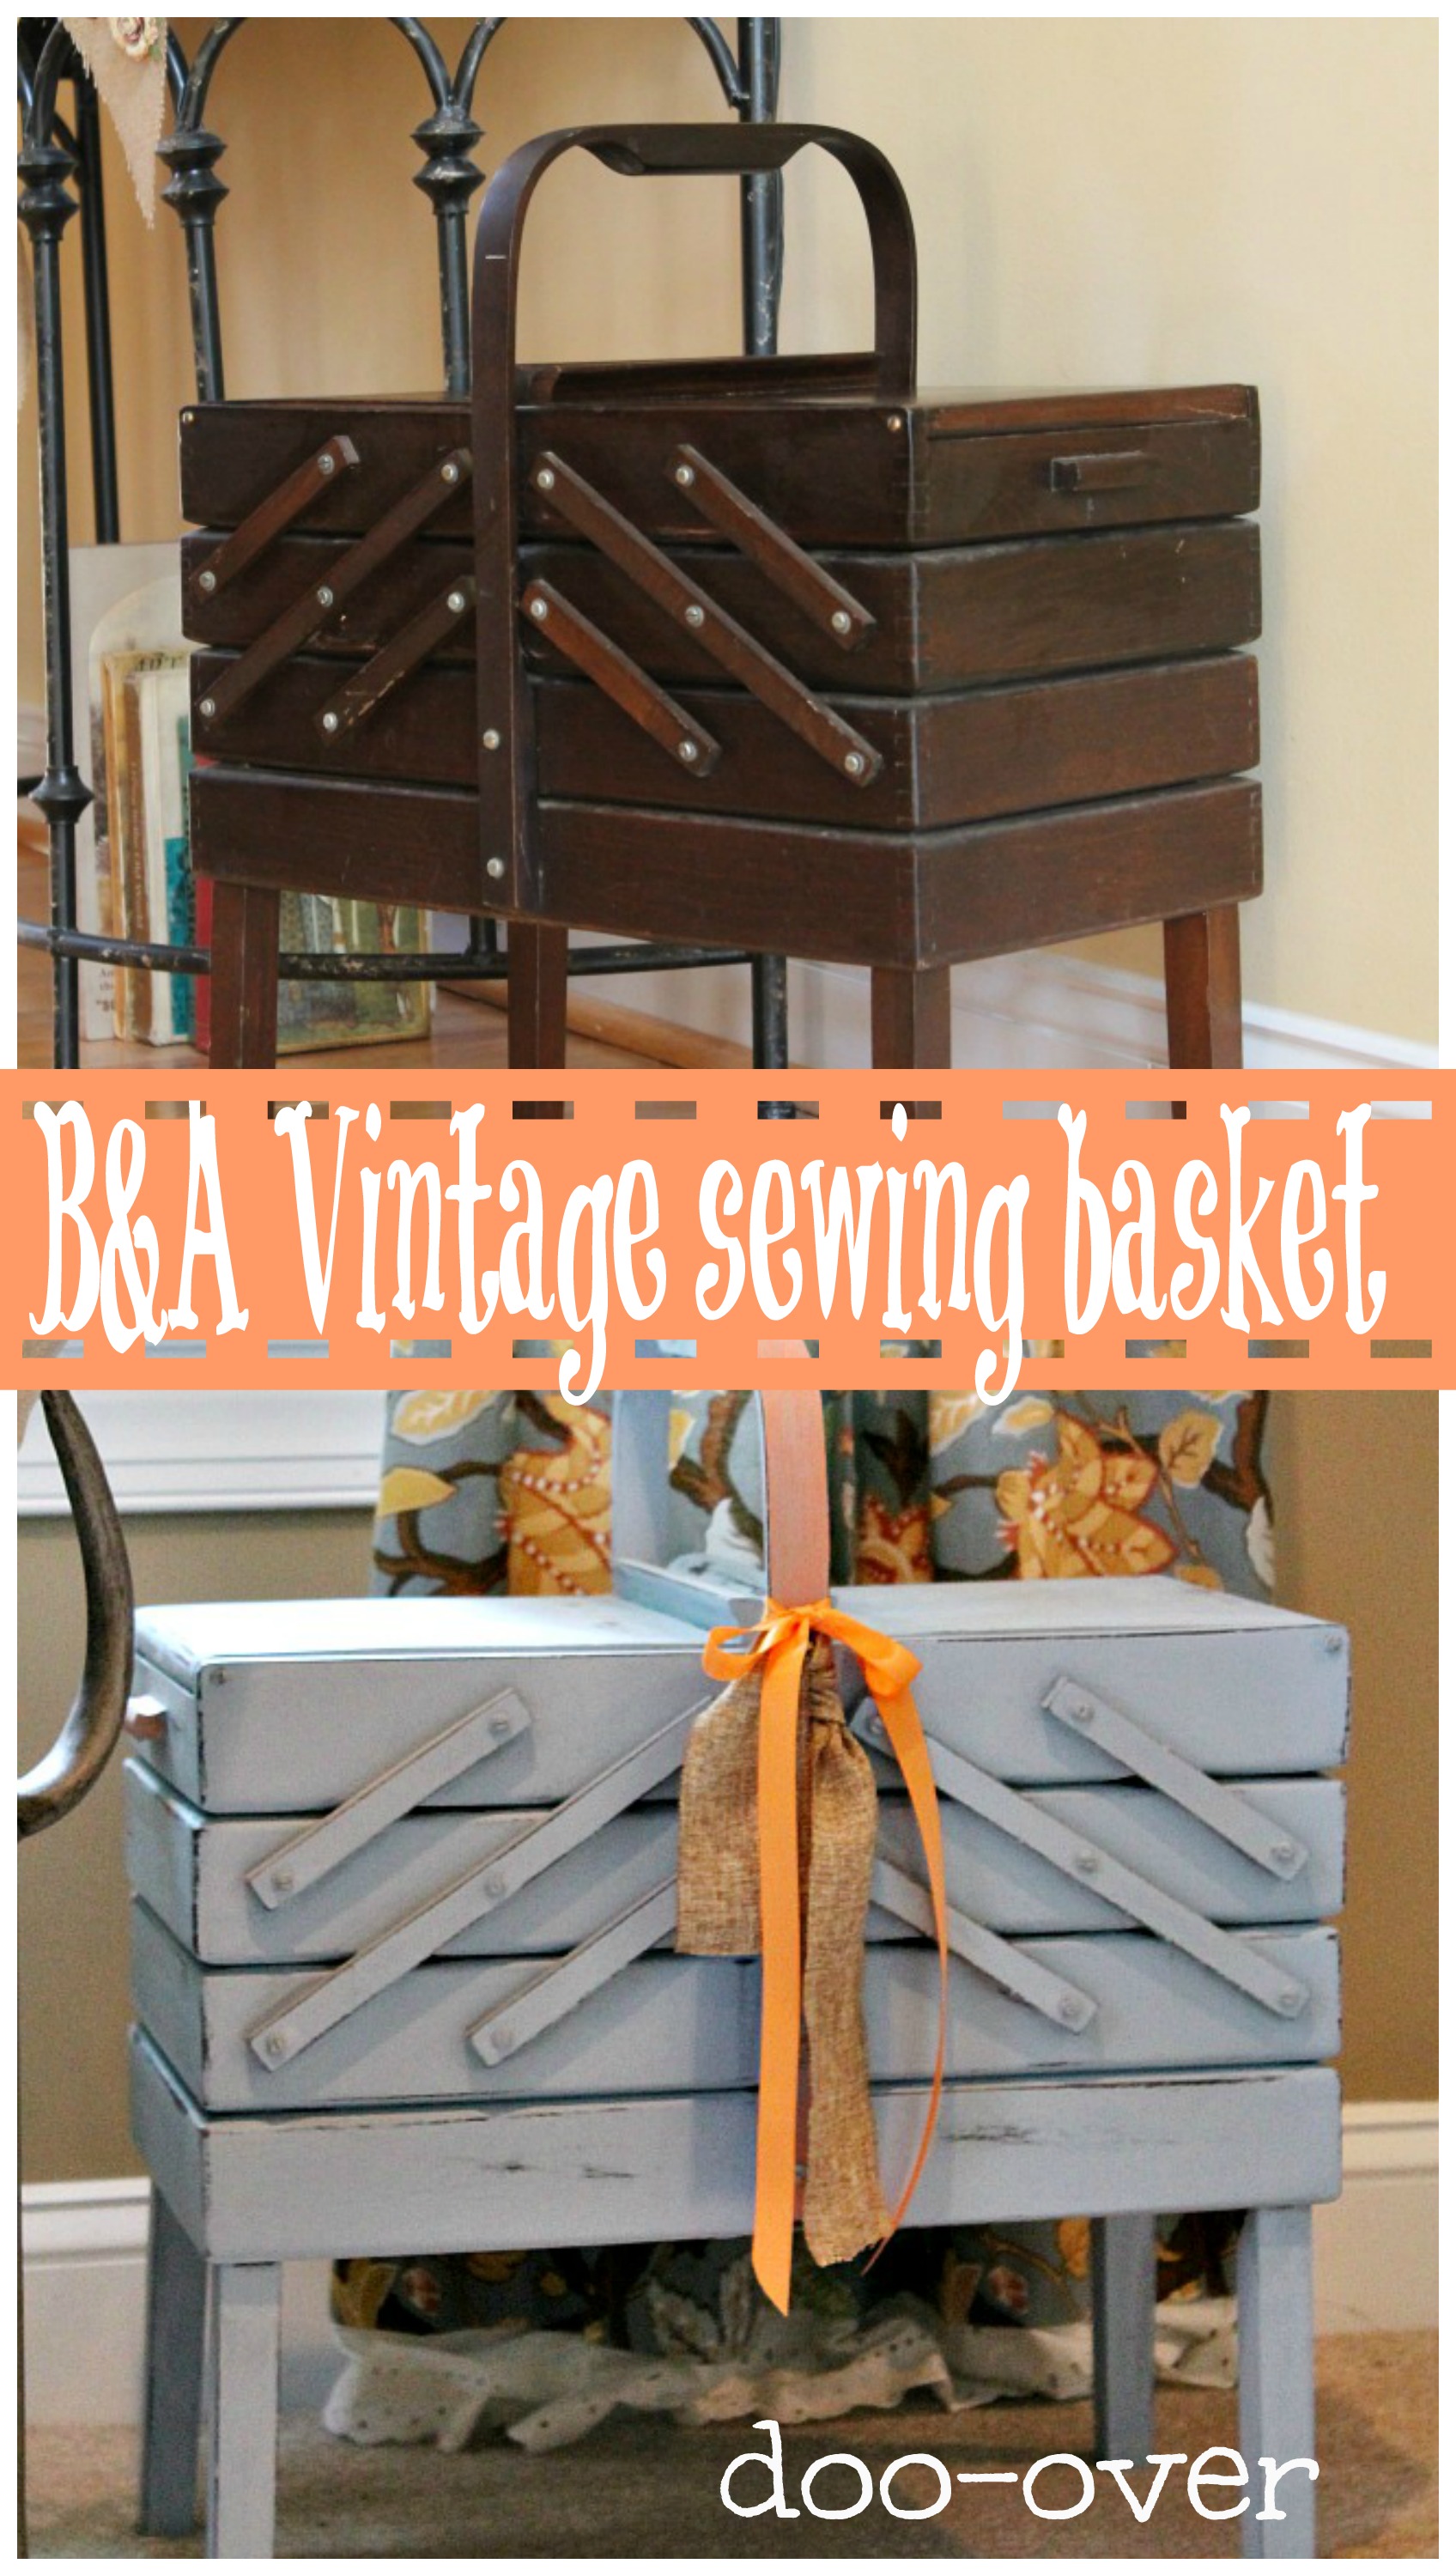 Before and after vintage sewing basket